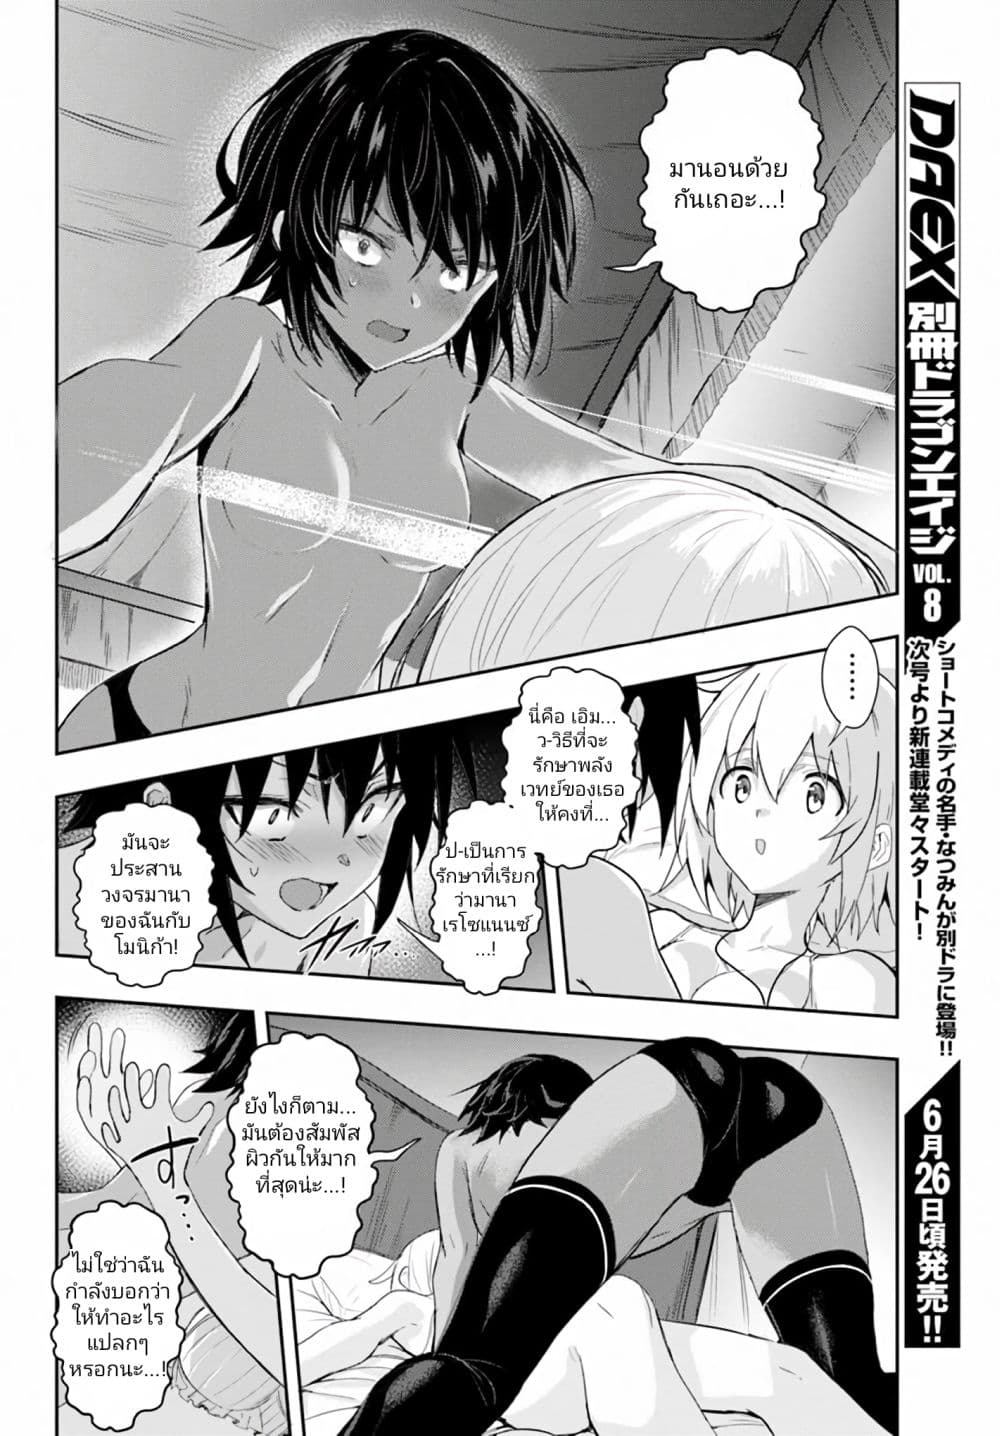 Witch Guild Fantasia 6 (12)